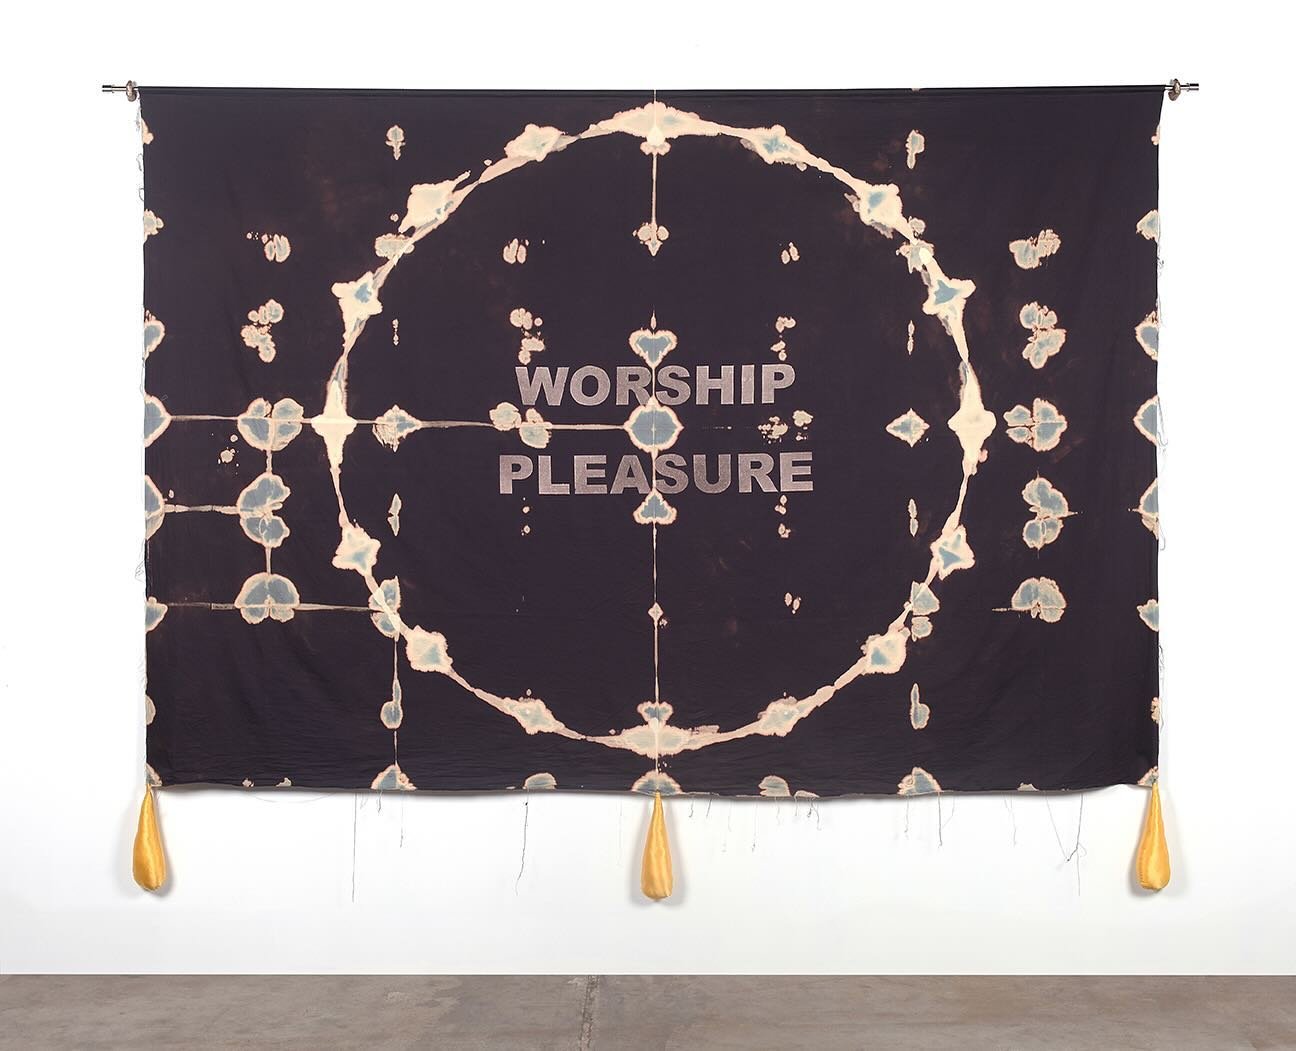 WORSHIP PLEASURE
2024
Cotton, bleach, silk, steel, bronze finger hooks (or chain when suspended).
215 x 284 x 7 cm

At the heart of this collection lies the circle, a symbol of awakening and altered states of being. Each artwork is a portal inviting 